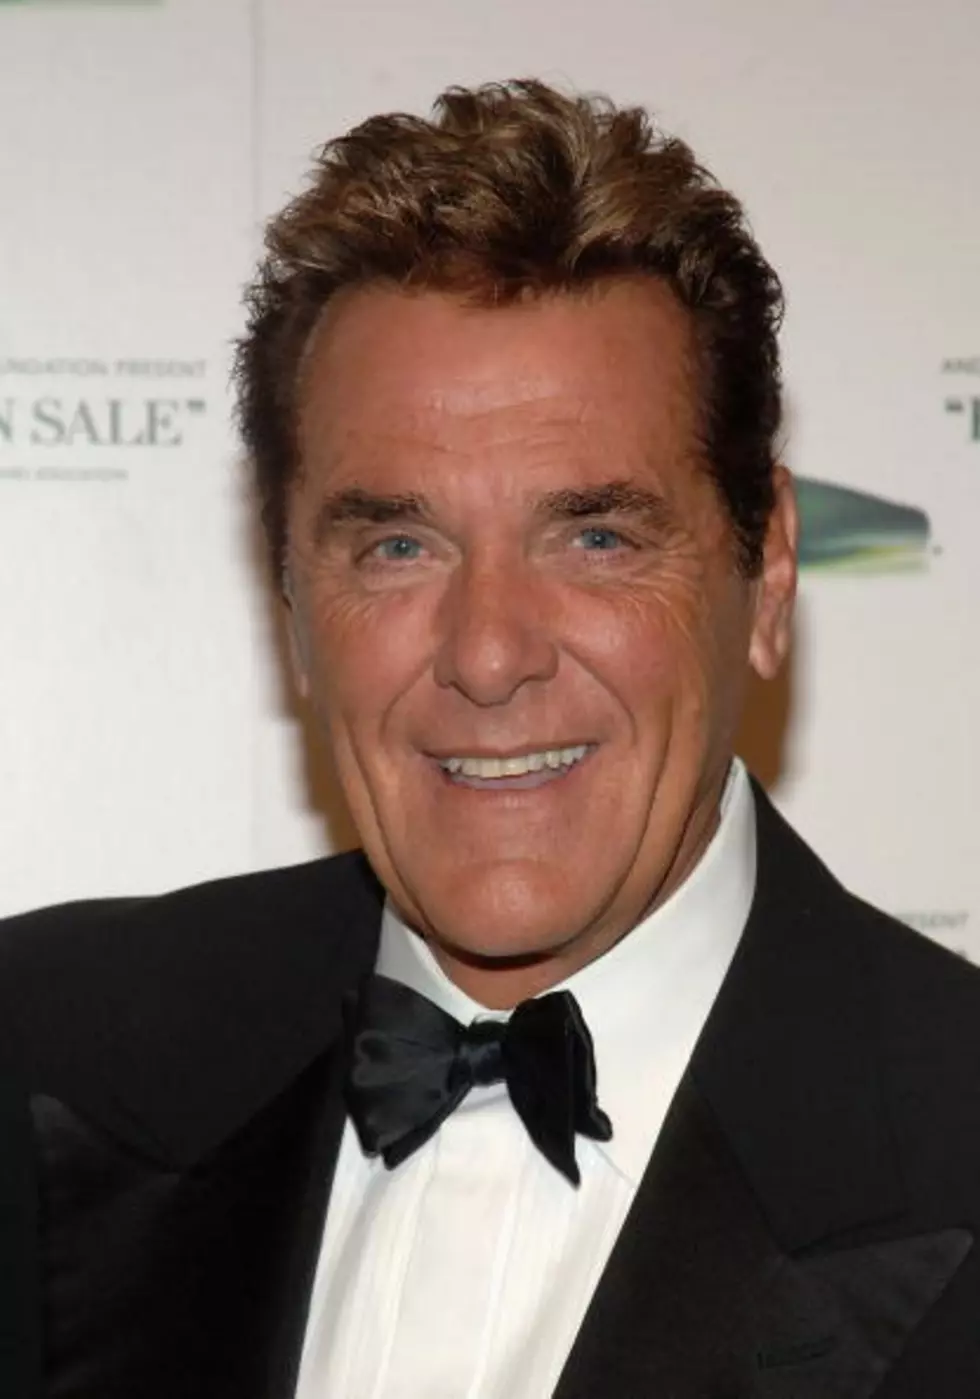 Chuck Woolery wants to Cut Government Spending